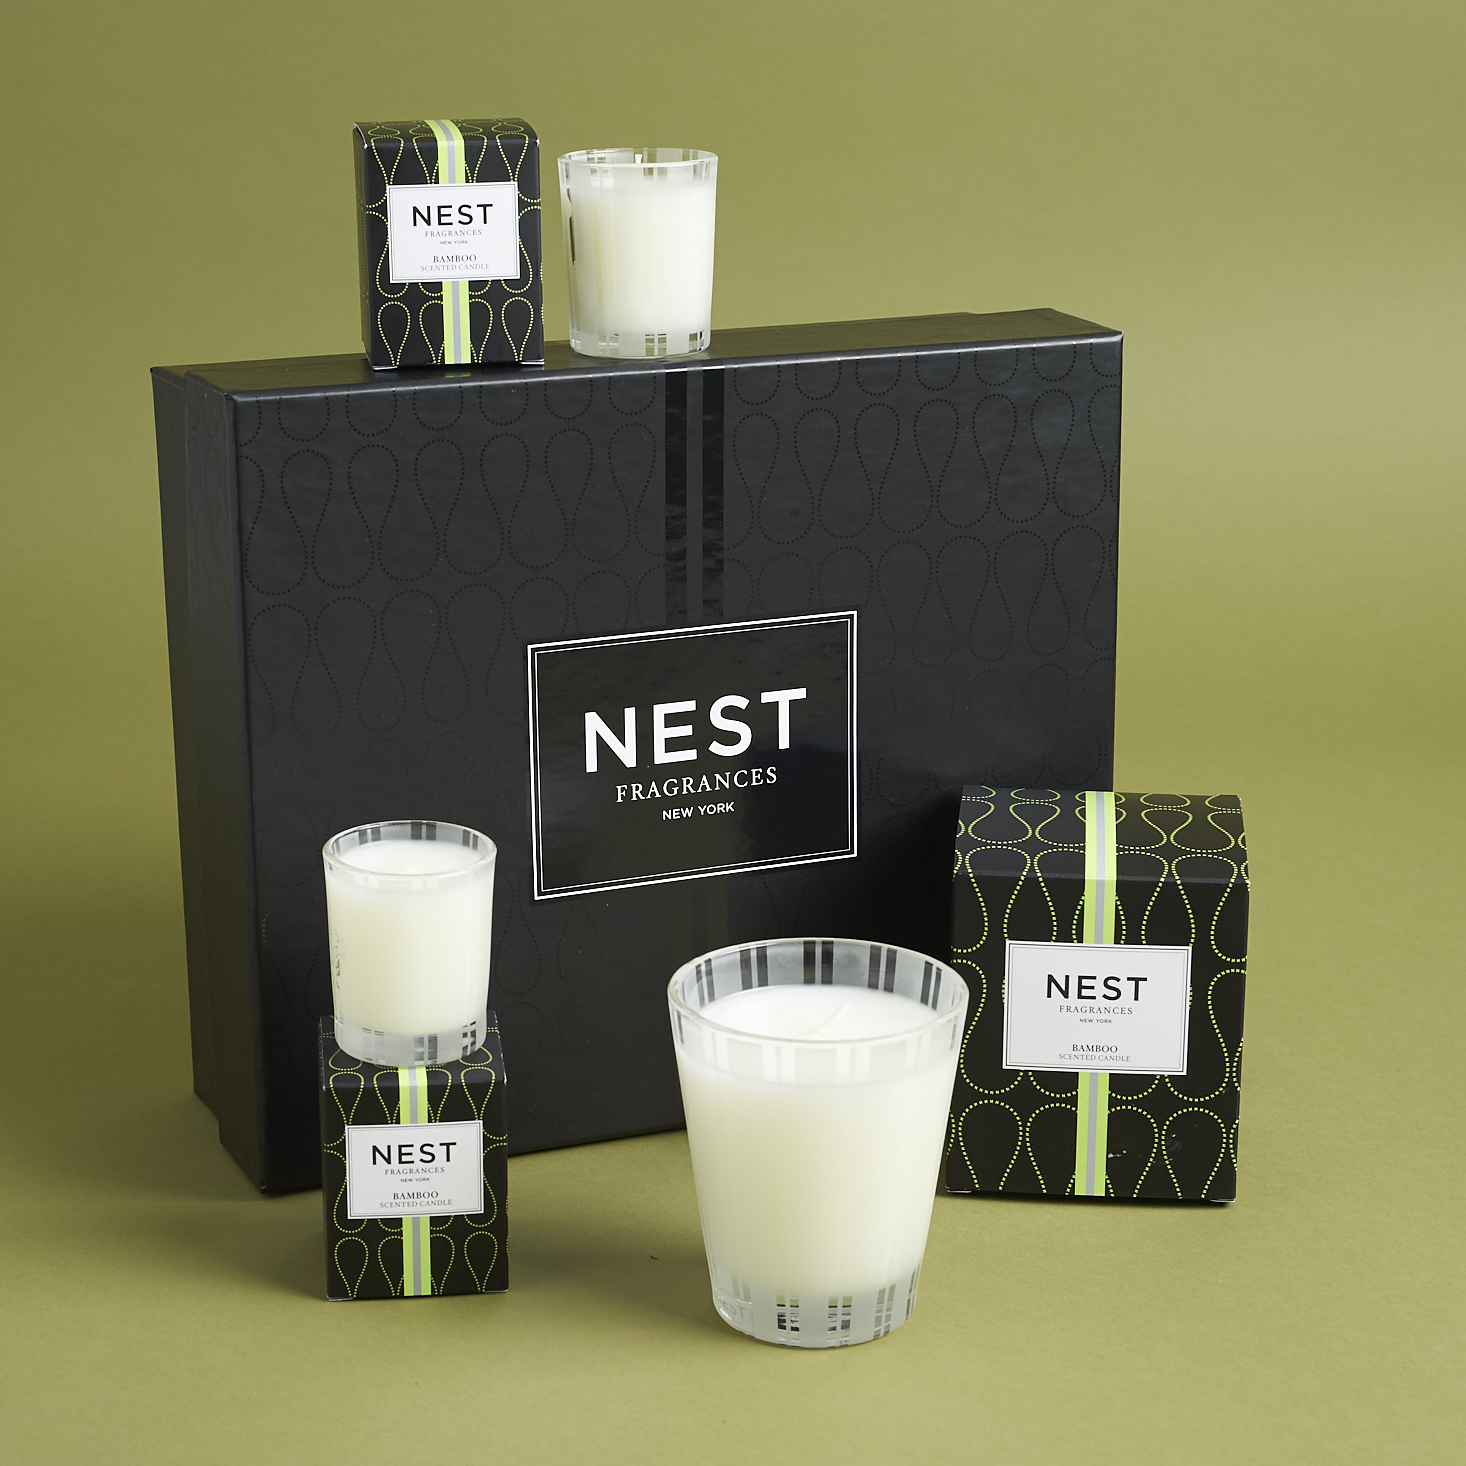 Next by Nest Fragrances Subscription Box Review – May 2017